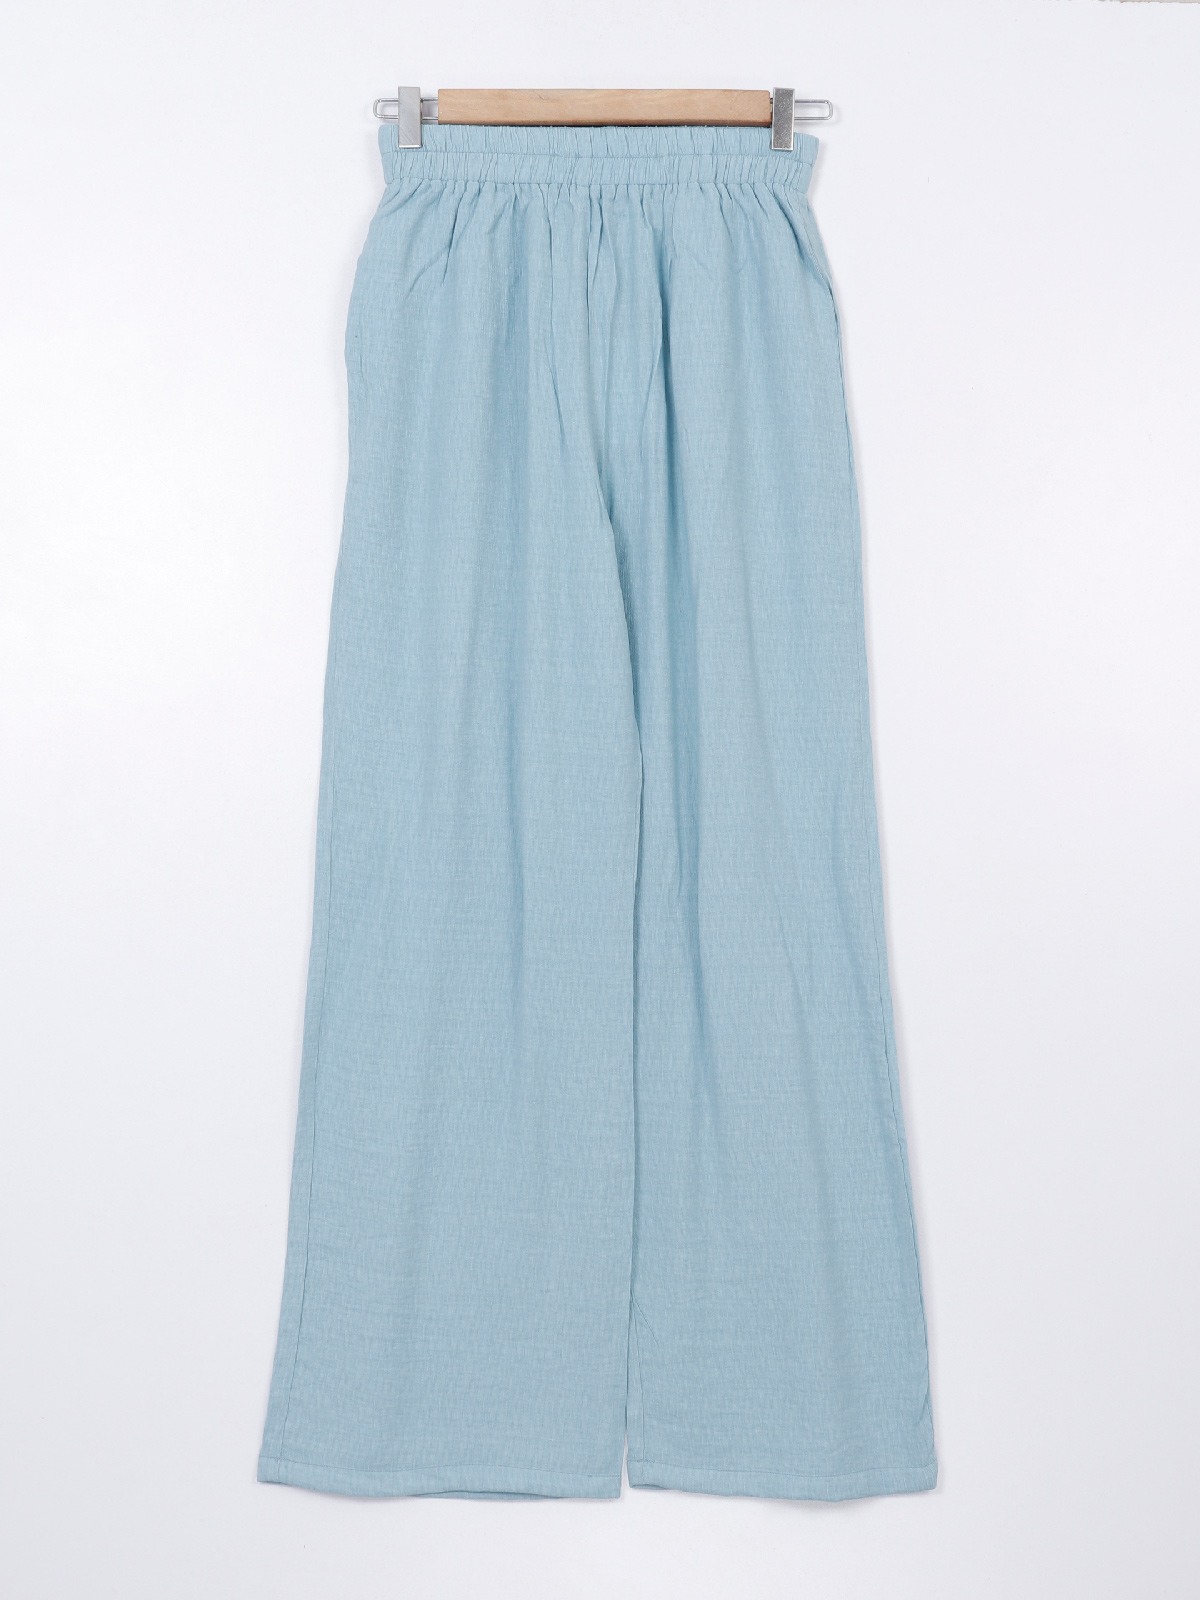 Casual Wear Rayon Plain Palazzo Pants, Waist Size: 30.0, Size: 30-36 at Rs  130 in Jaipur